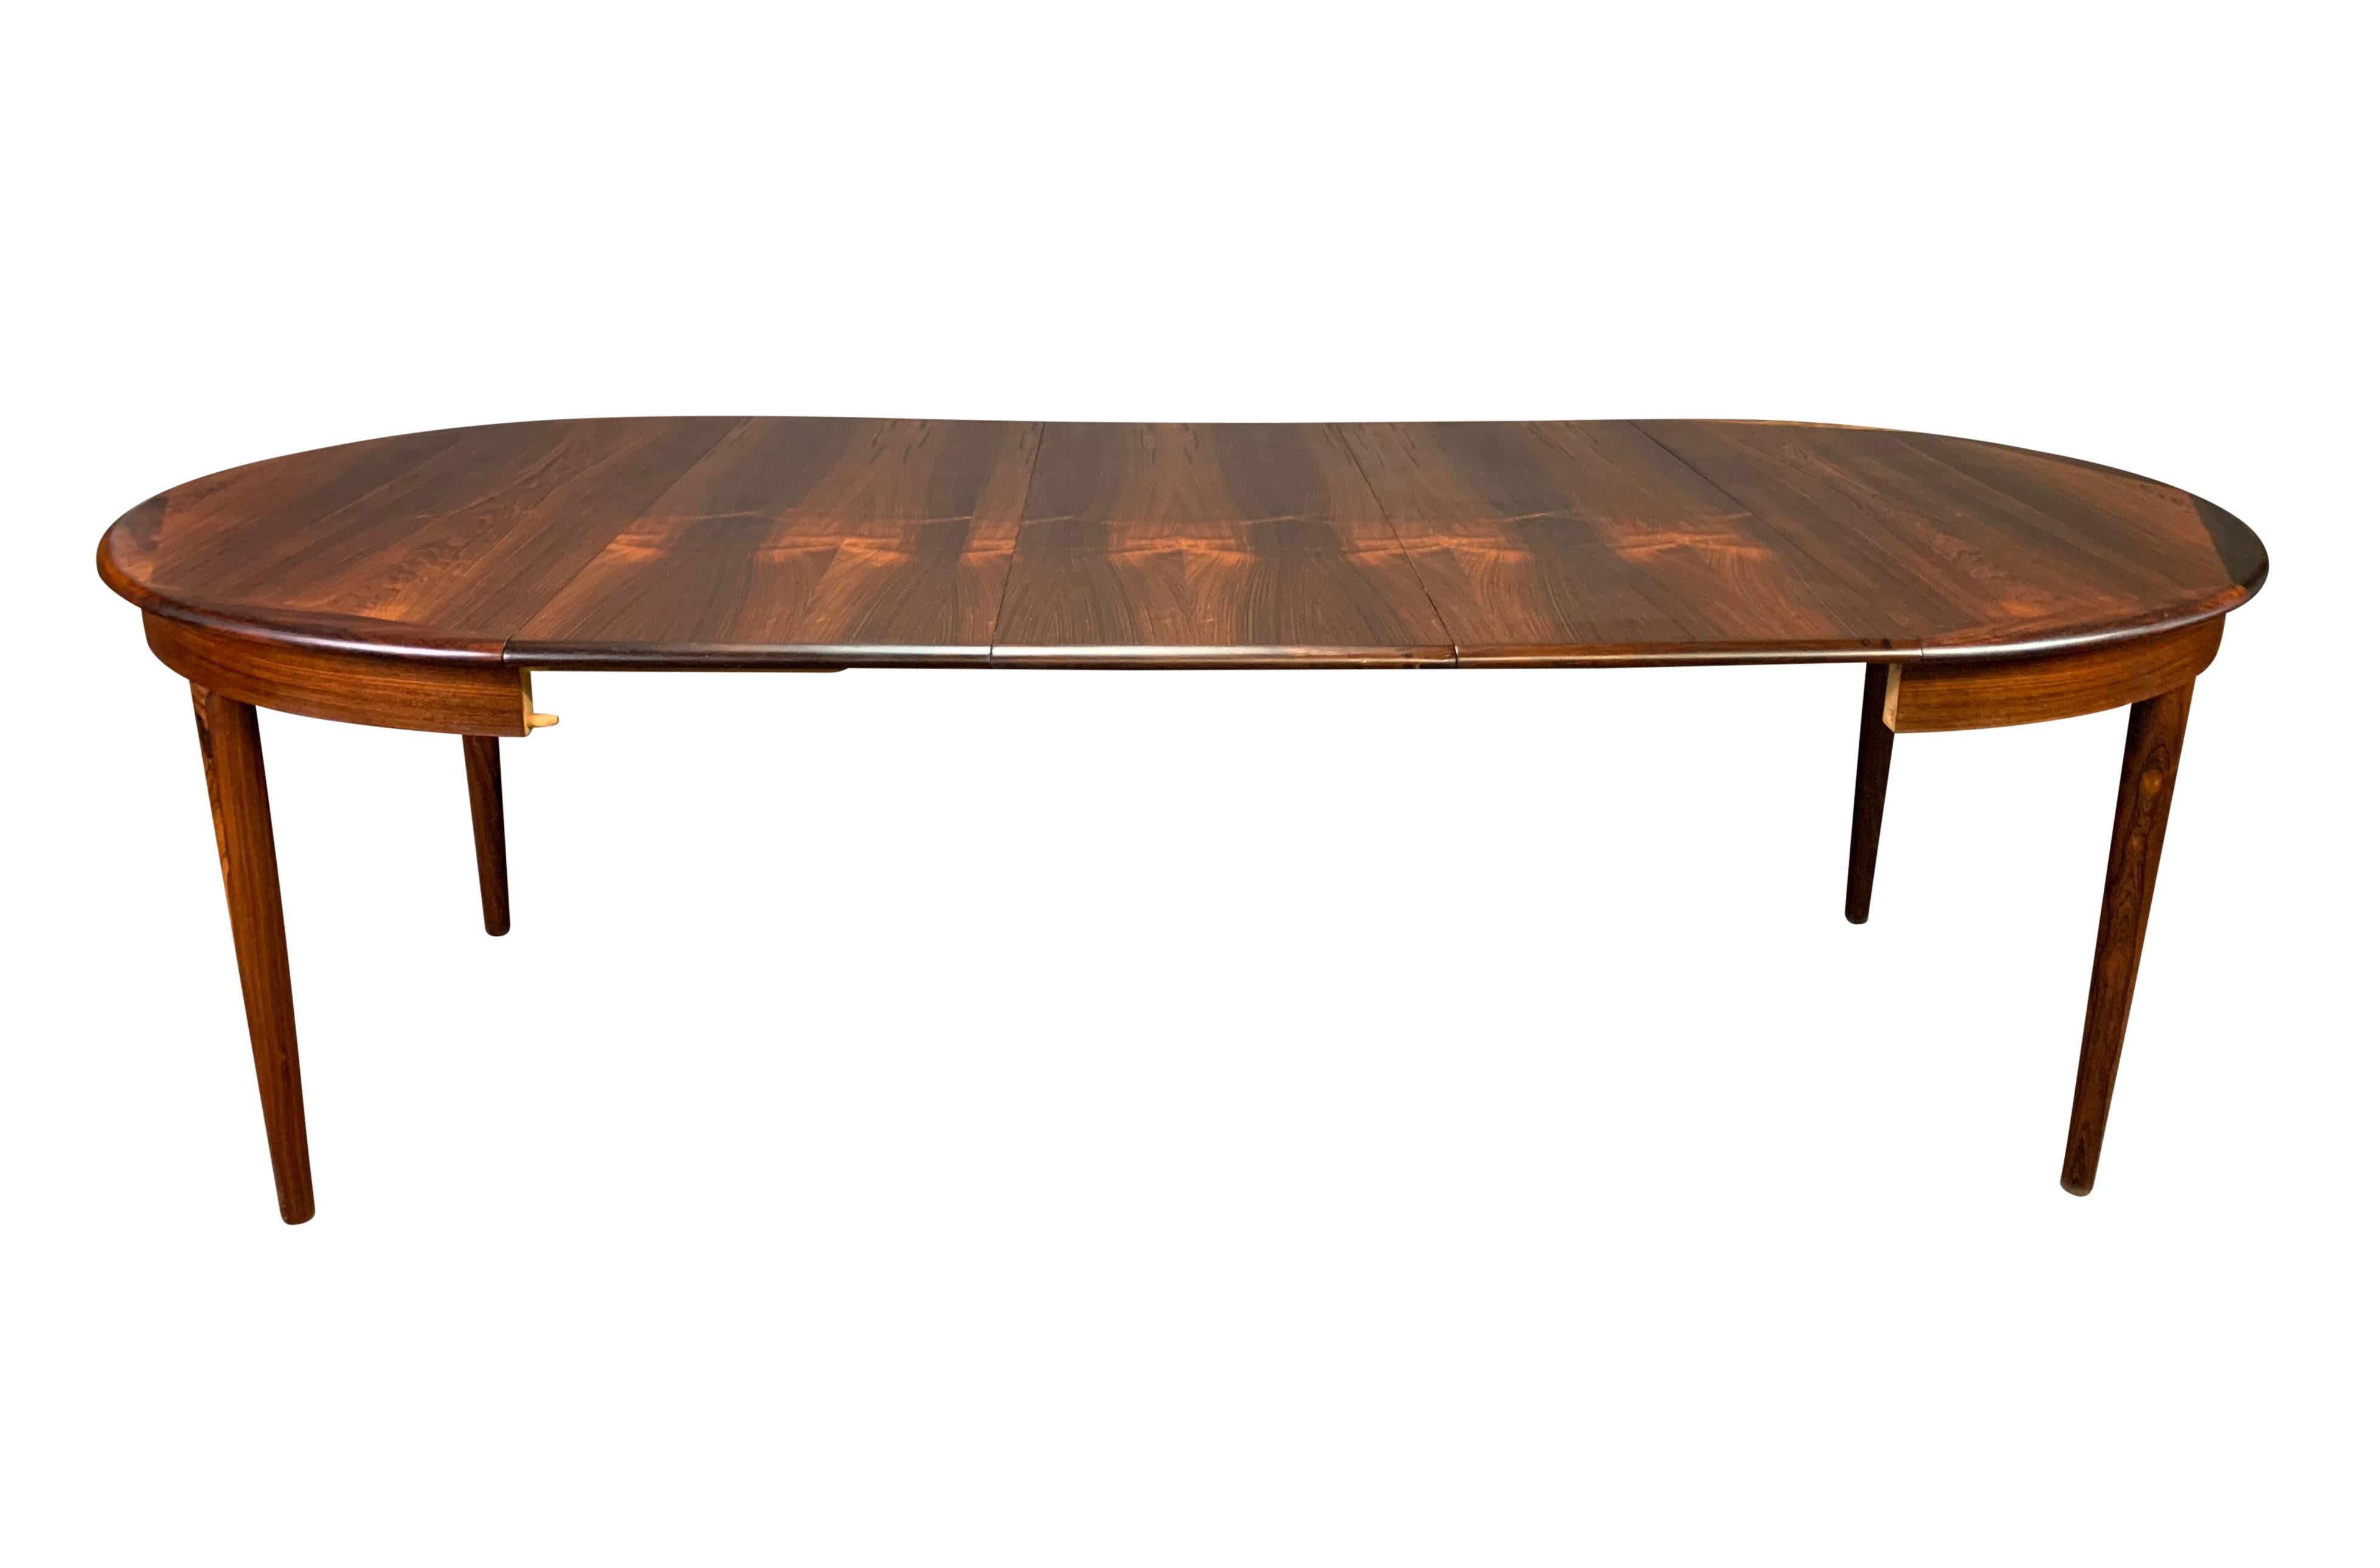 Vintage Danish Mid-Century Modern Rosewood Round Dining Table with Leaves 1